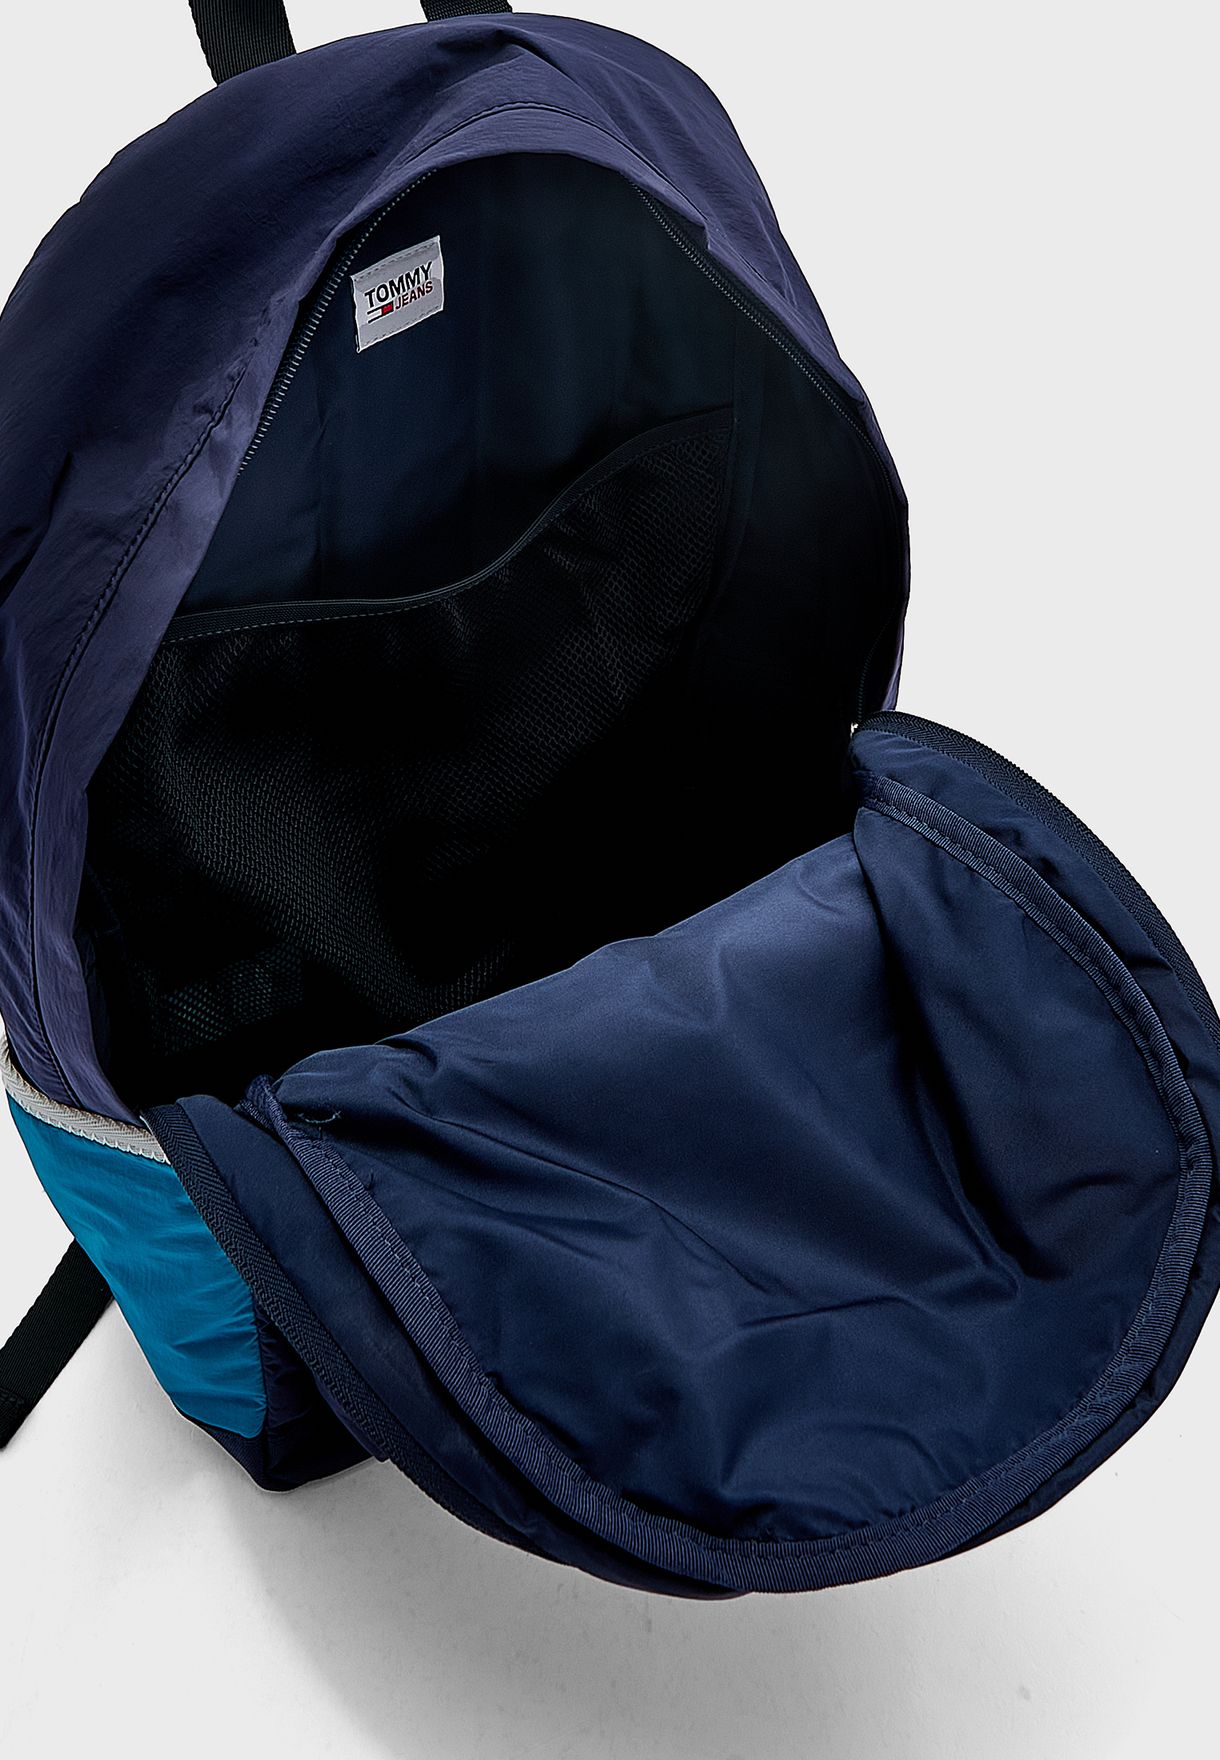 College Dome Backpack